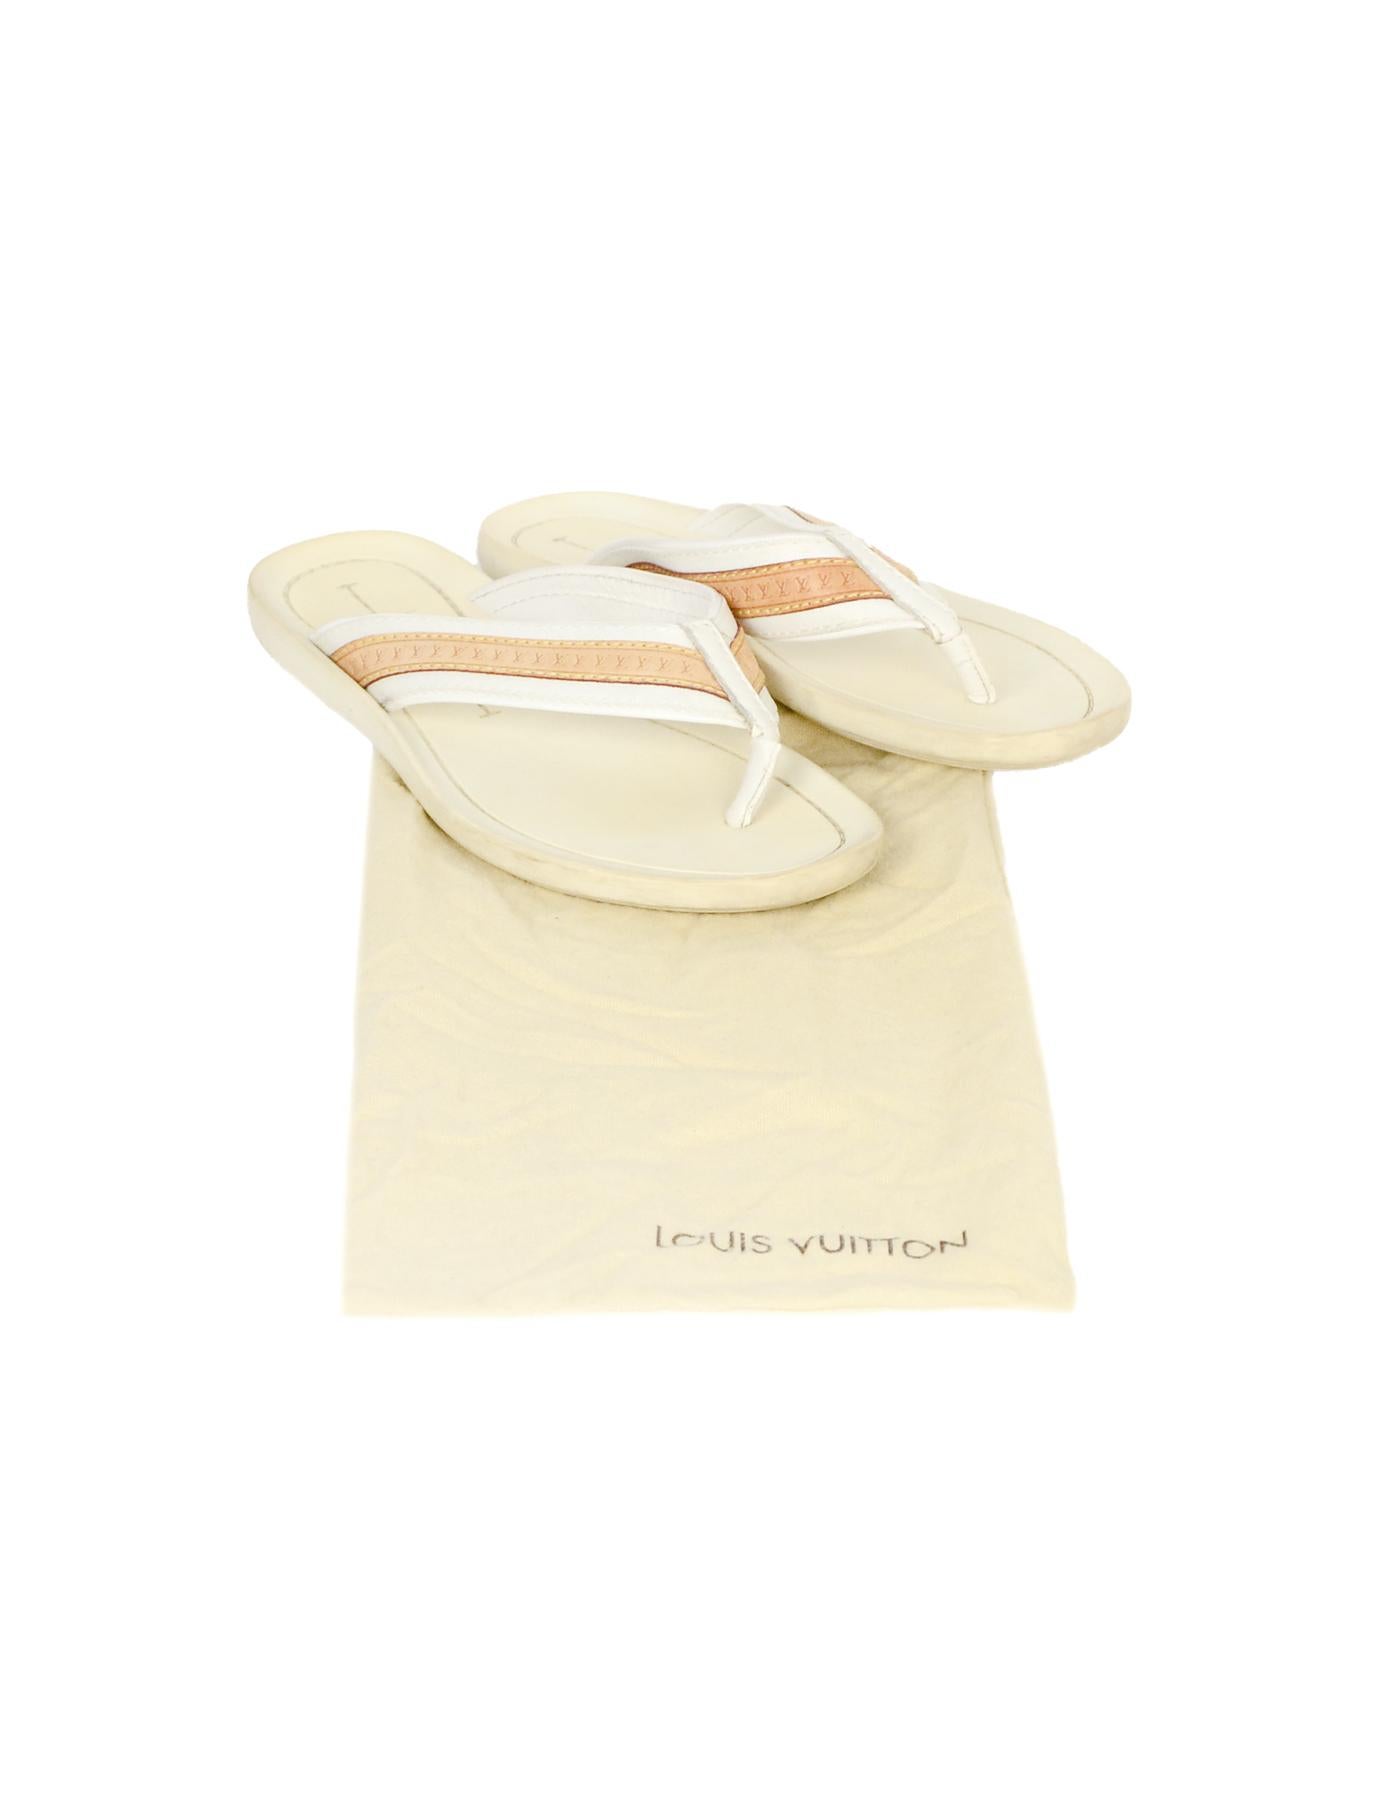 Louis Vuitton White Canvas/Leather Logo Thong Sandals Sz 38

Made In: Italy
Year of Production: 2006
Color: White, tan
Materials: Canvas, leather, rubber
Closure/Opening: Slide on
Overall Condition: Good pre-owned condition with exception of some